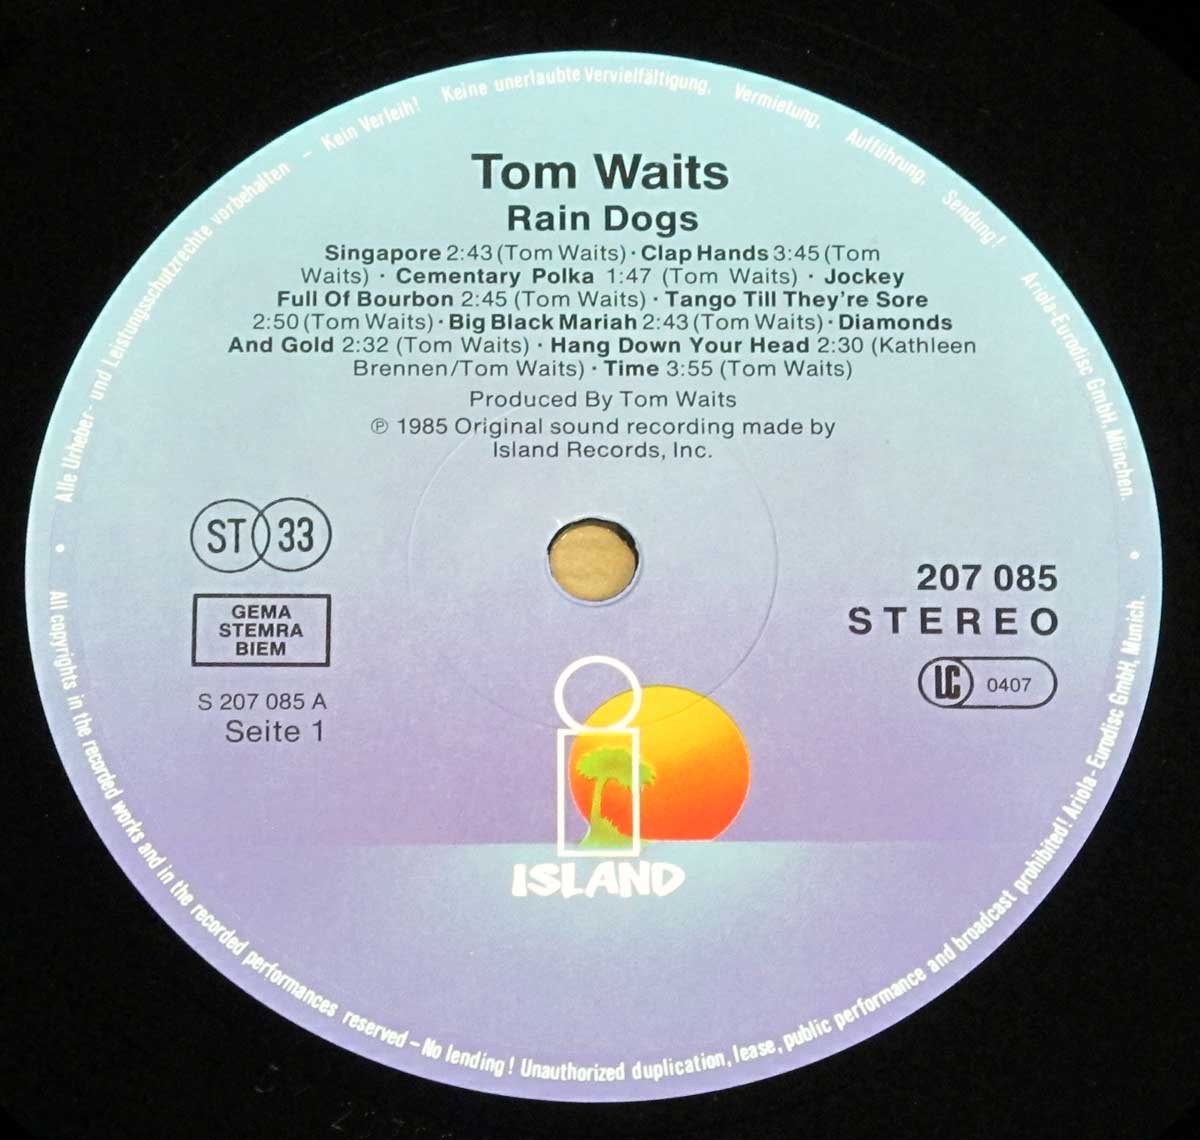 Close-up Photo of "TOM WAITS - Rain Dogs" Record Label 